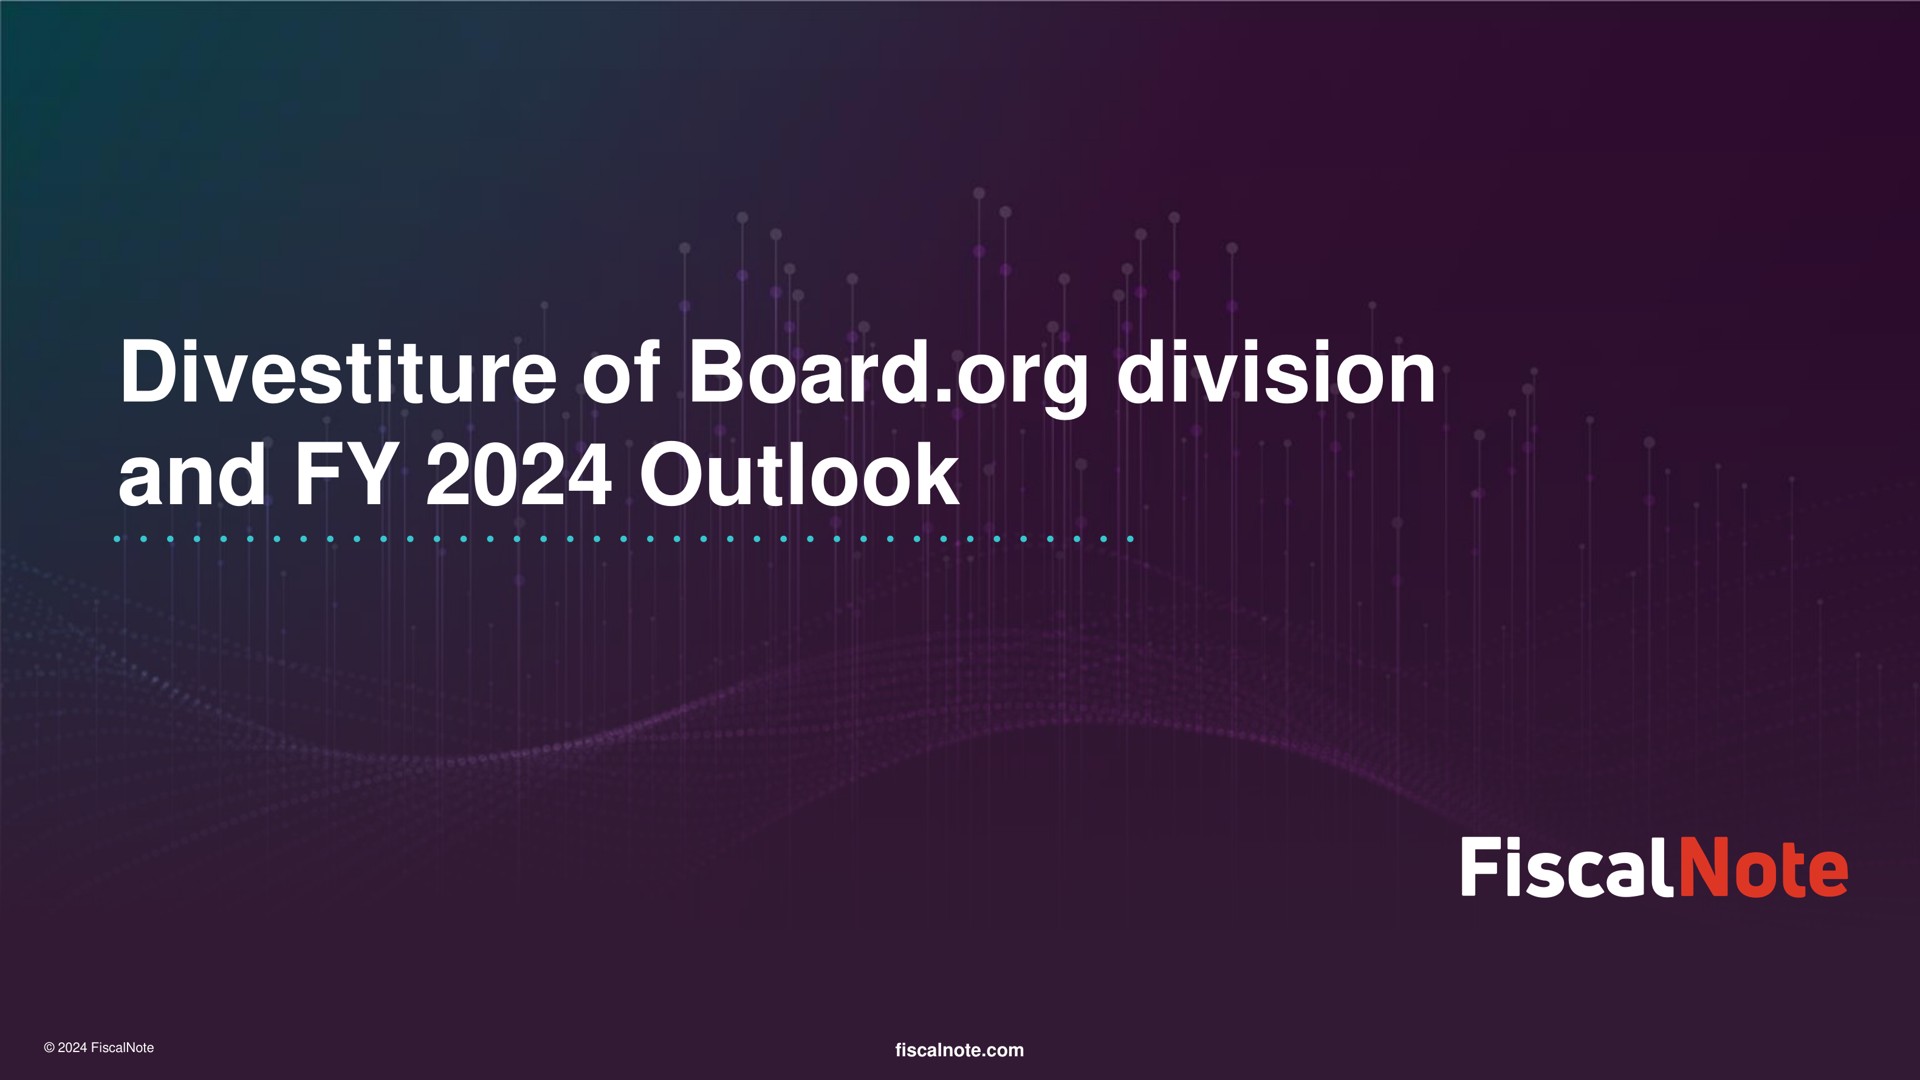 divestiture of board division and outlook fiscal | FiscalNote